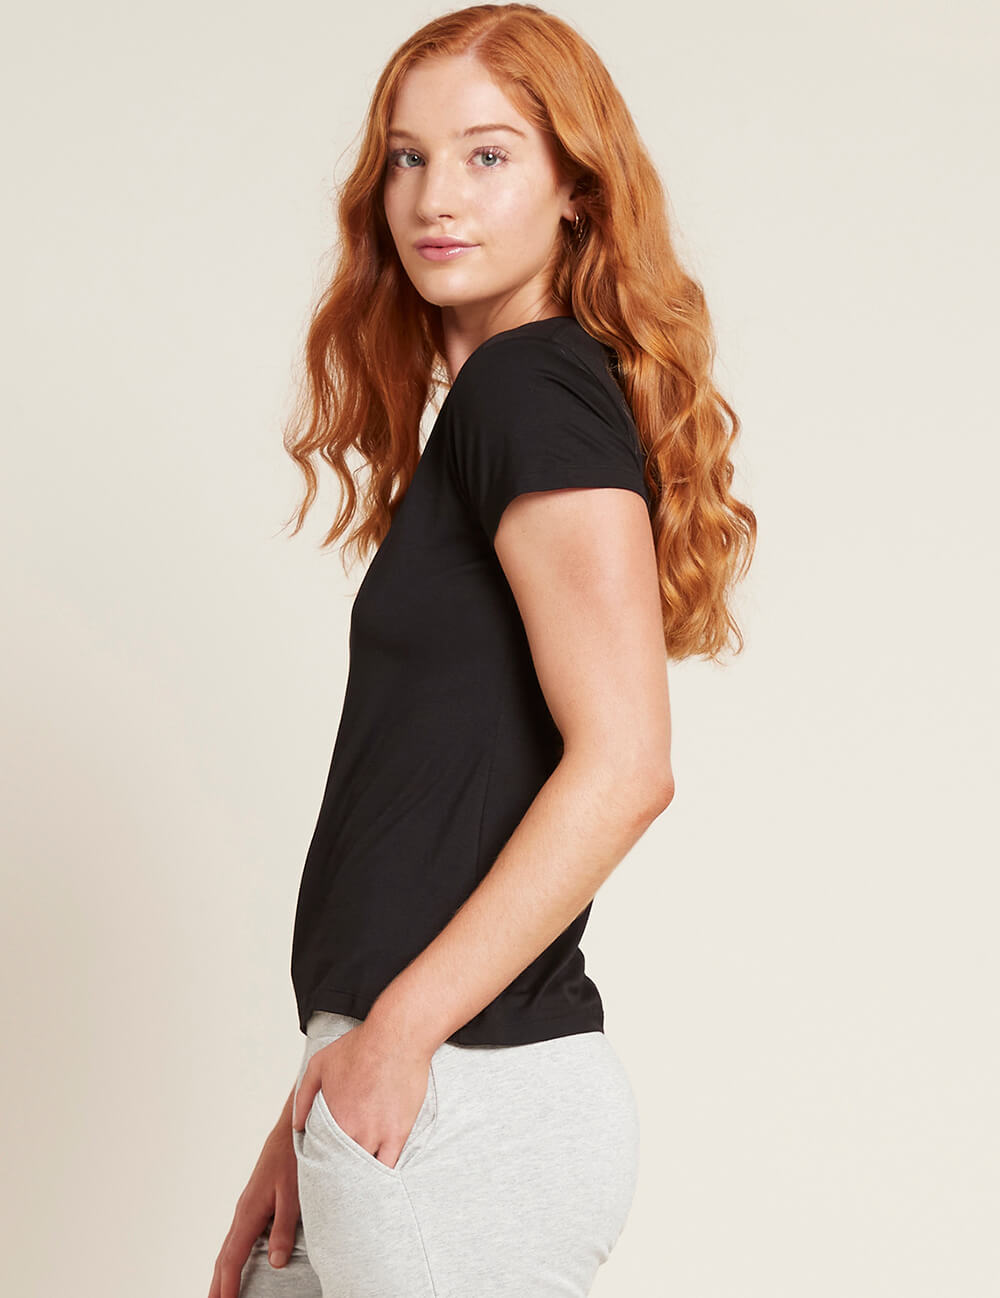 Boody Bamboo Women's V-Neck T-Shirt in Black Side View